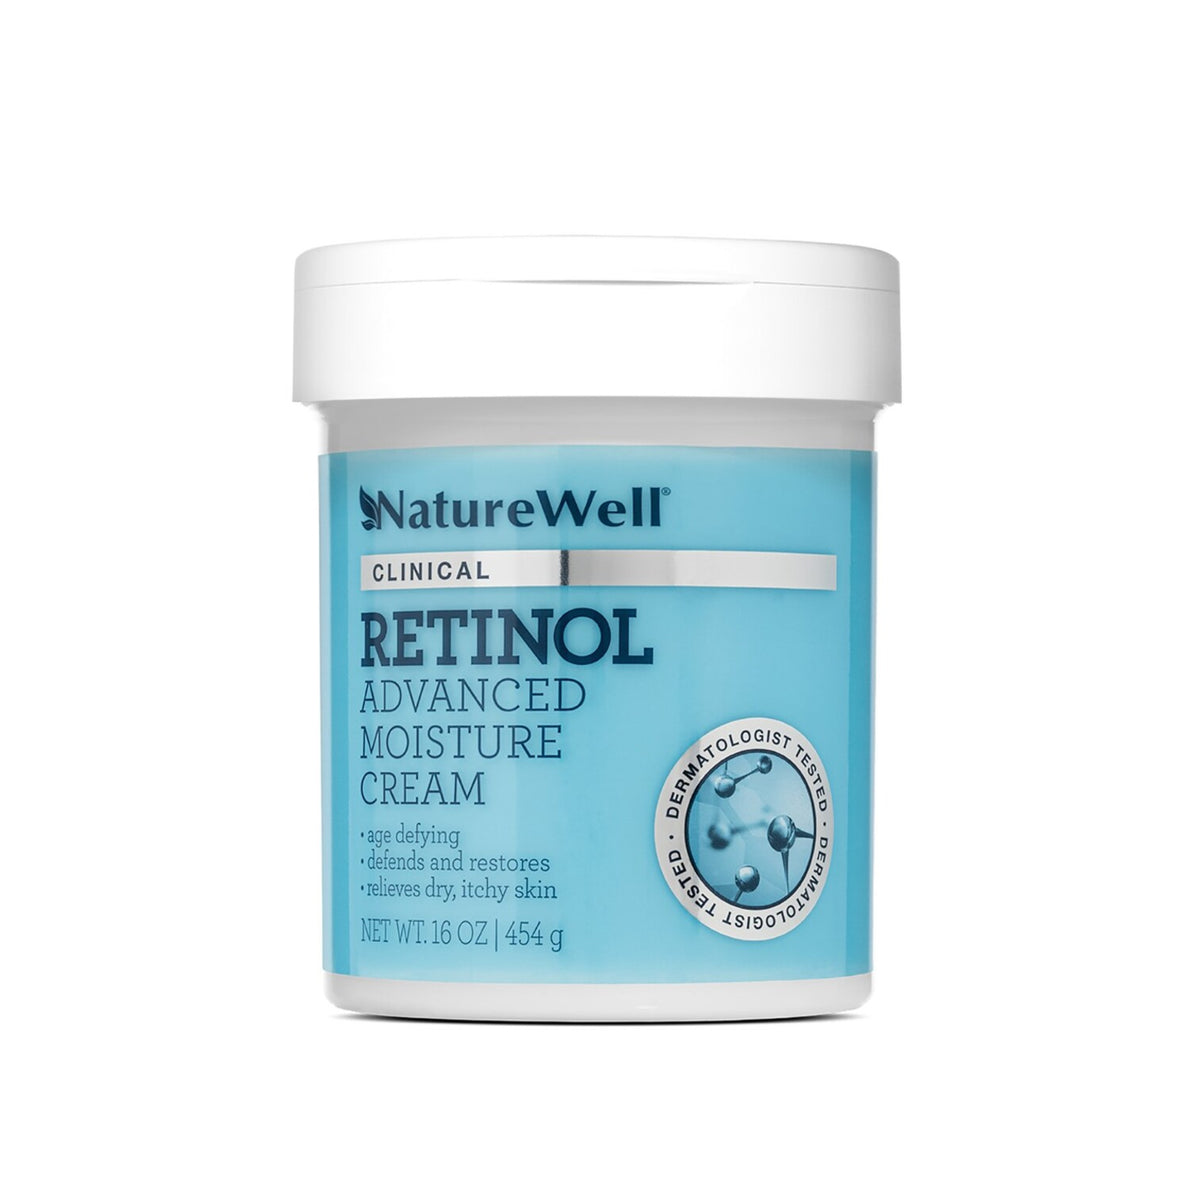 NATURE WELL Extra Virgin Coconut Oil Moisturizing Cream for Face, Body, &  Hands, Restores Skin's Moisture Barrier, Provides Intense Hydration For Dry